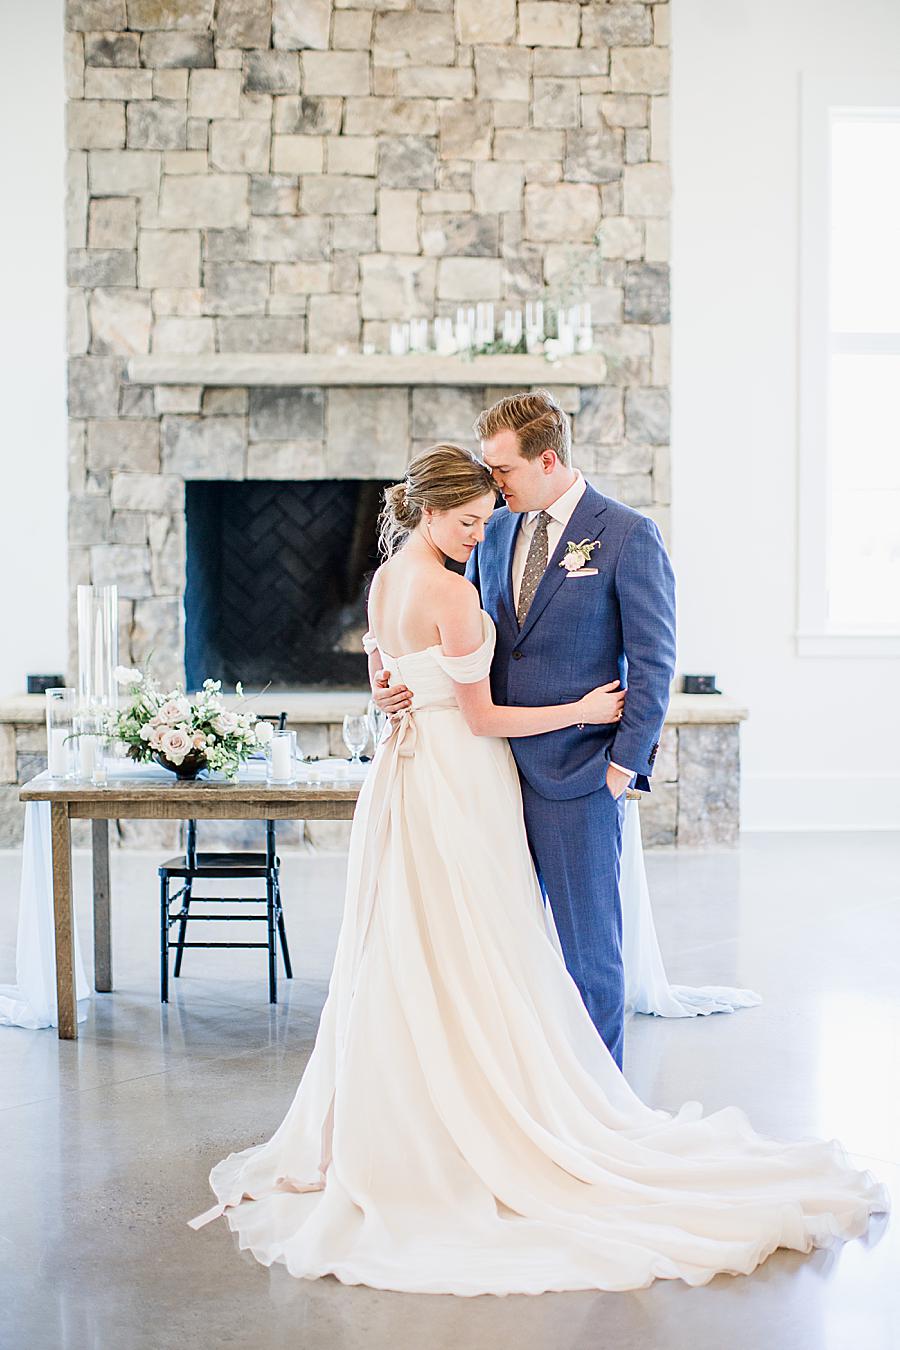 Stone fireplace at this Marblegate Farm Wedding by Knoxville Wedding Photographer, Amanda May Photos.